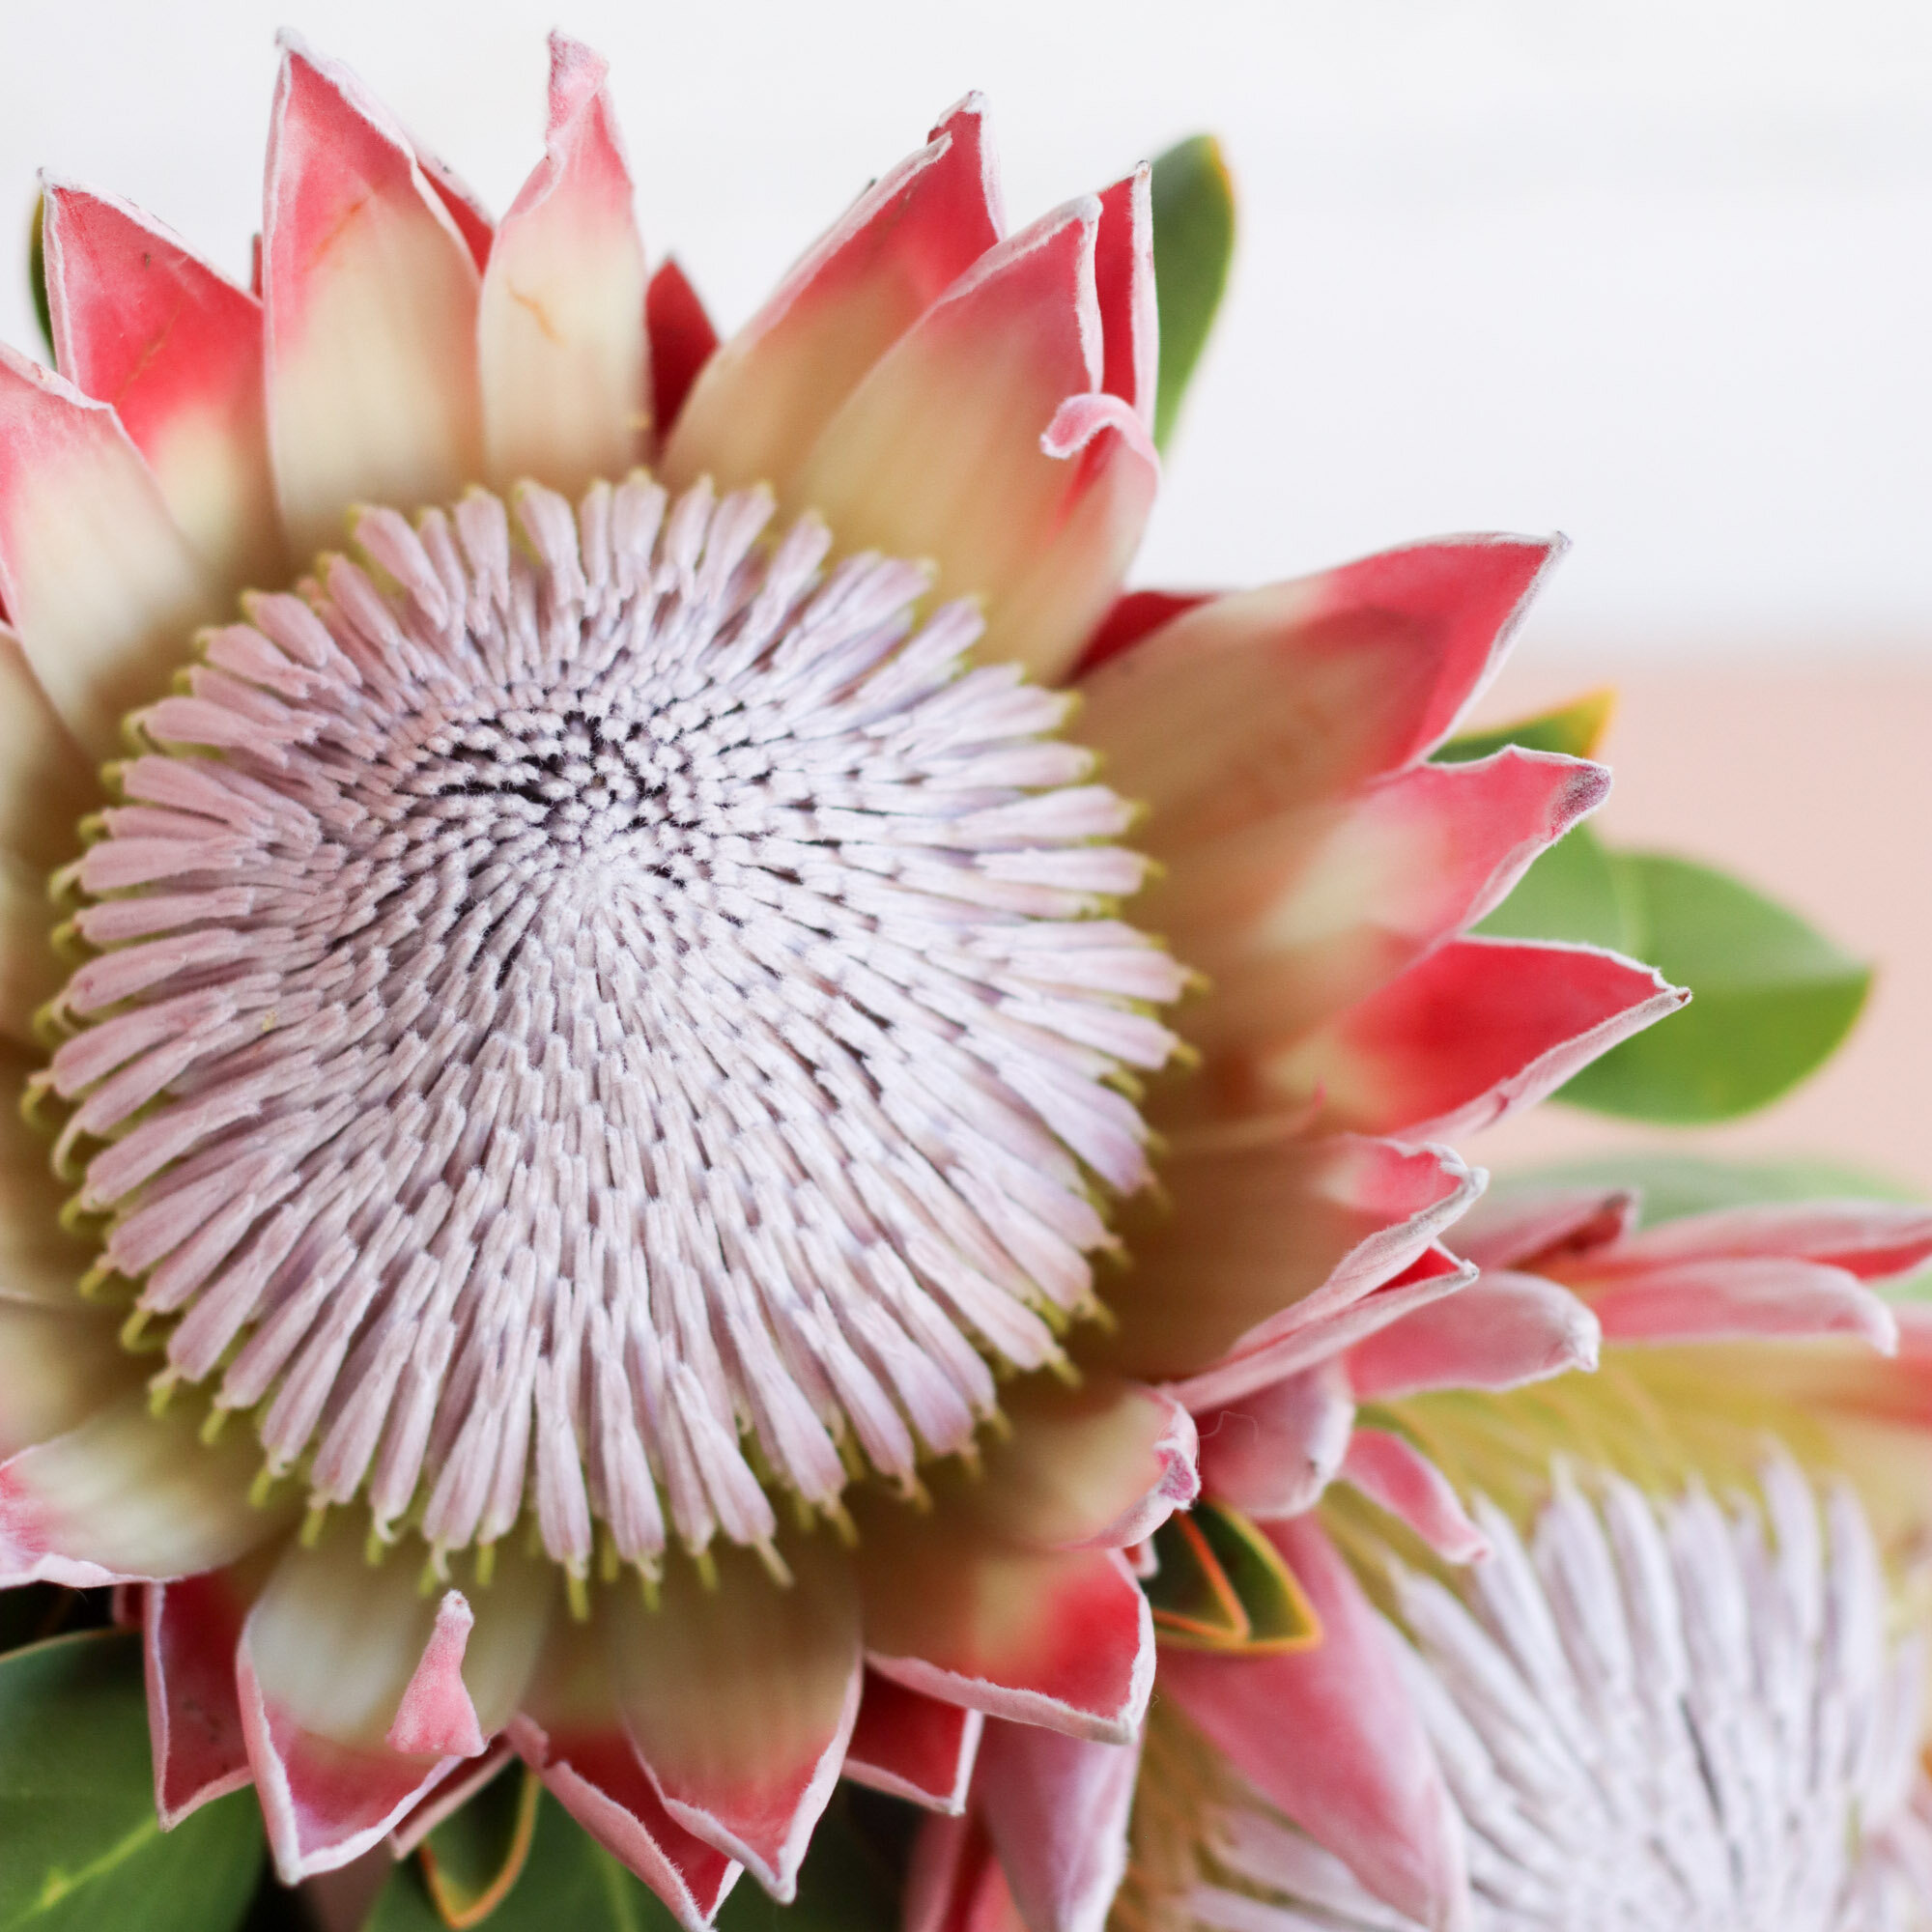 A close up of a large protea head in full bloom